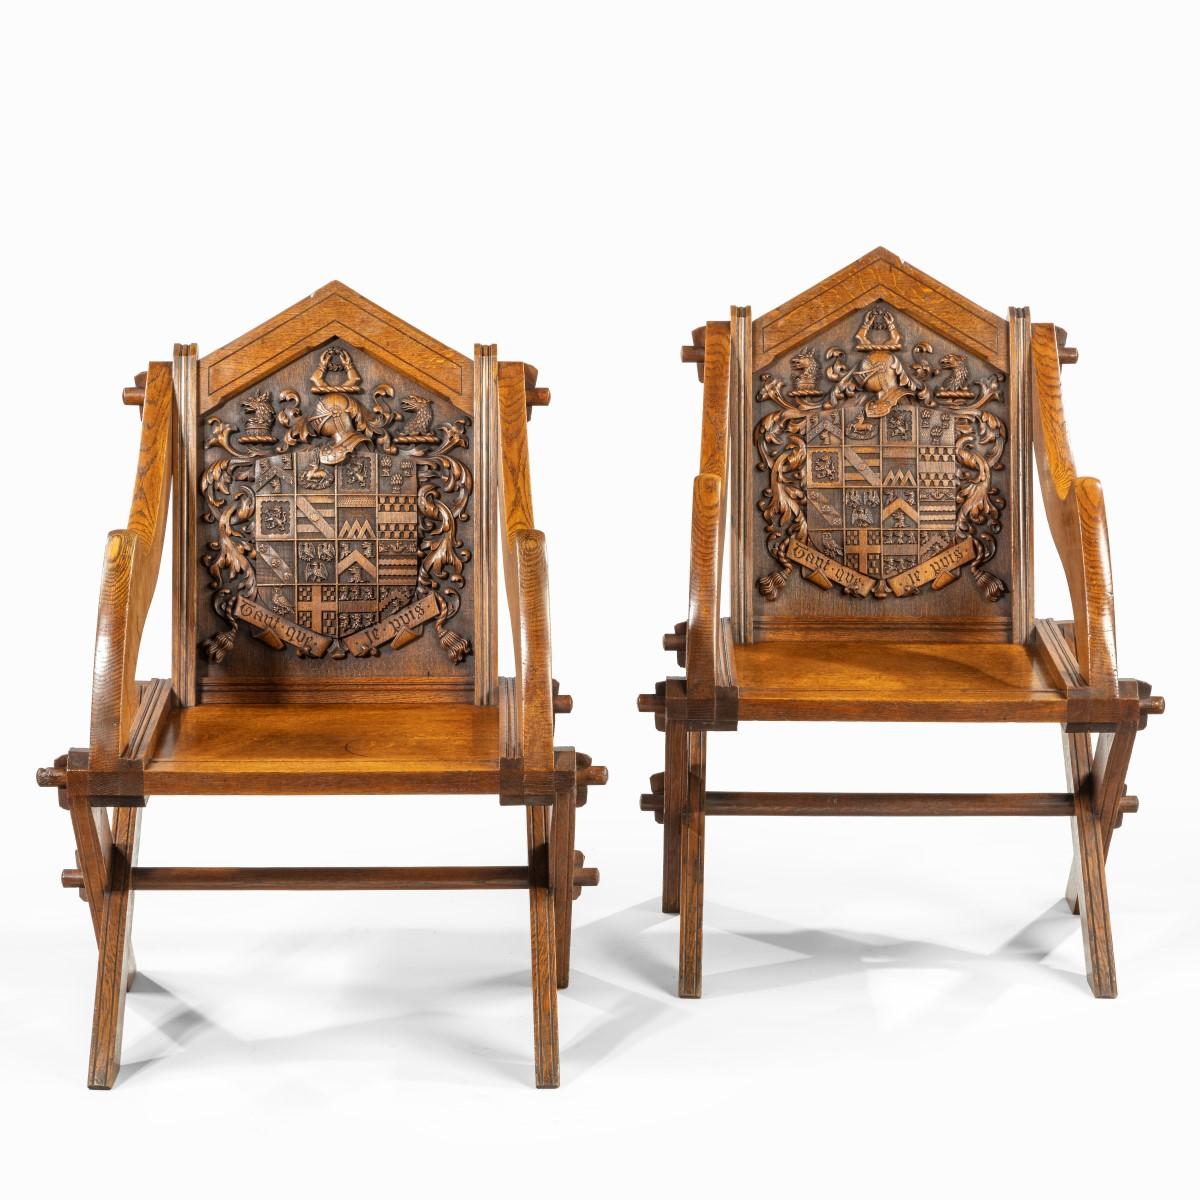 Each of these oak Glastonbury chairs has a pointed back and a fixed rectangular seat. The shaped arms and X-frame legs are attached with protruding pegs, giving the impression of a collapsible or folding chair. The elaborate coats of arms carved